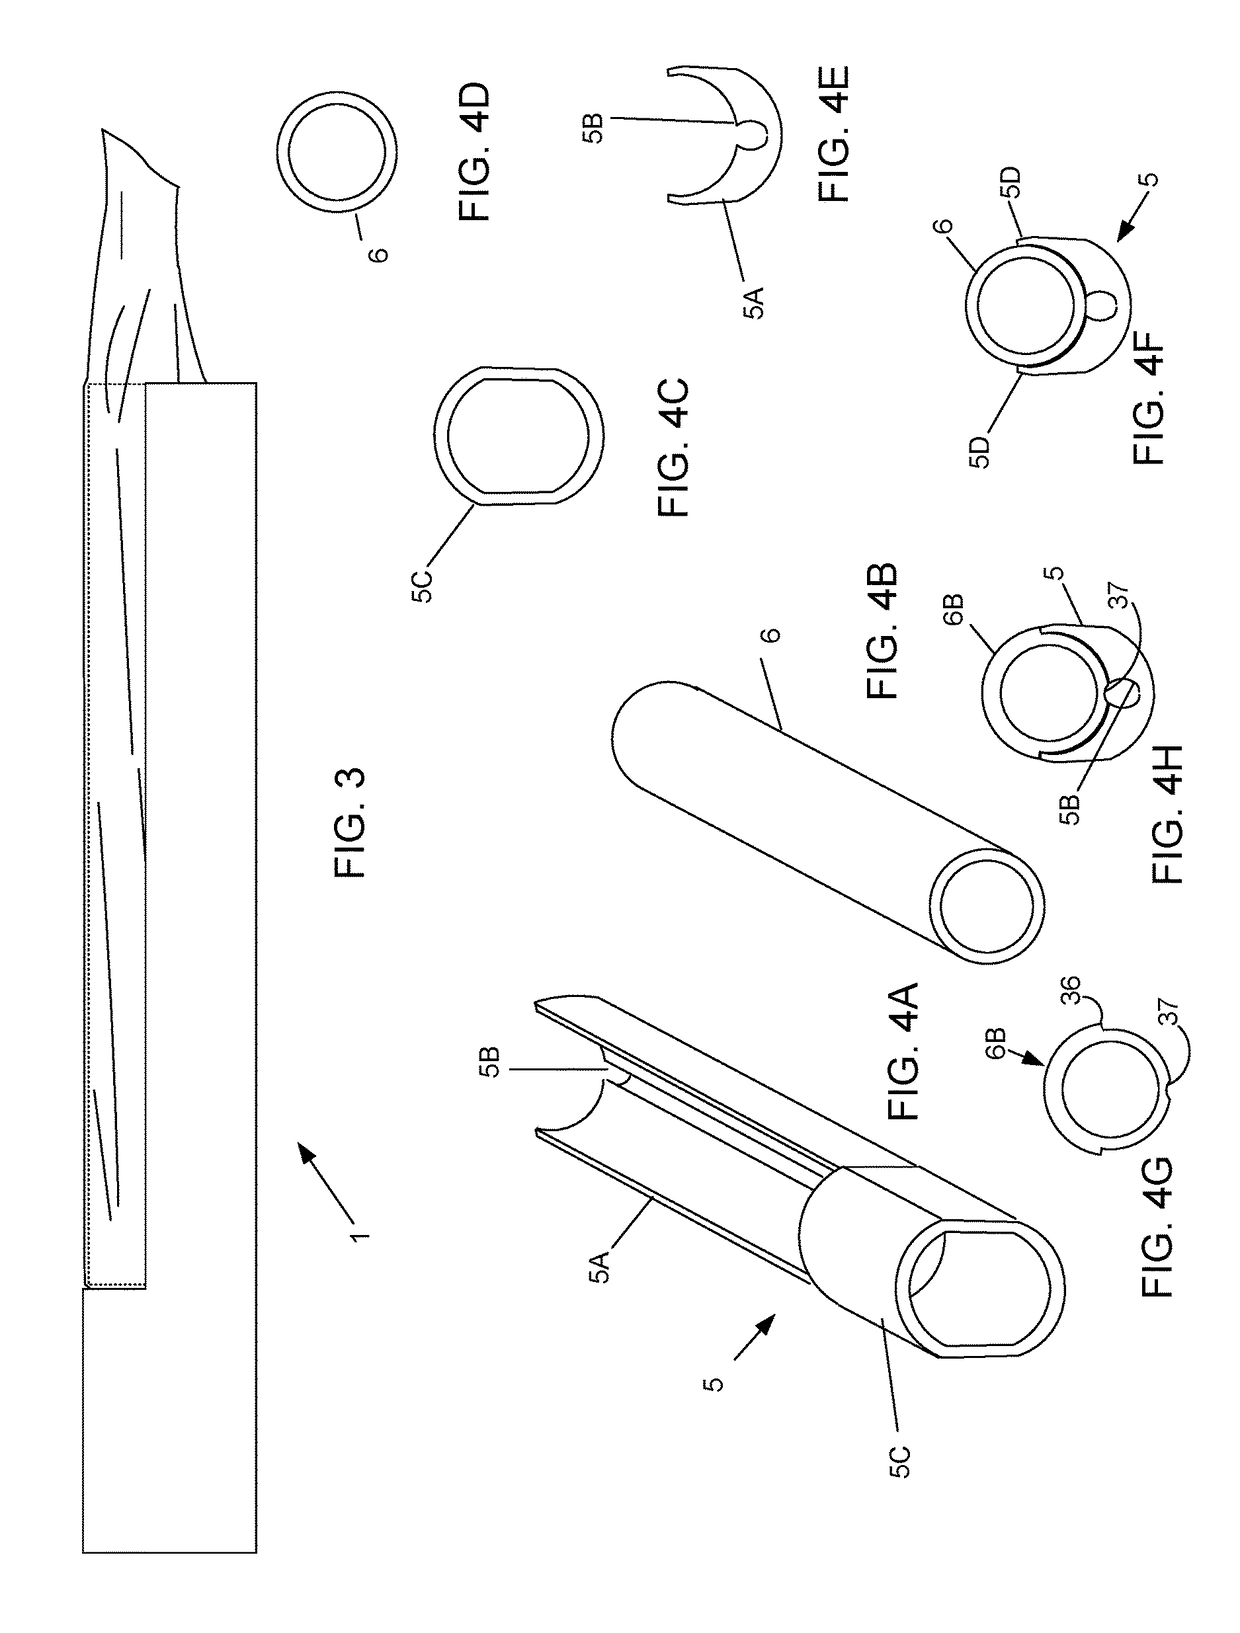 Device and method for conducting a pap smear test